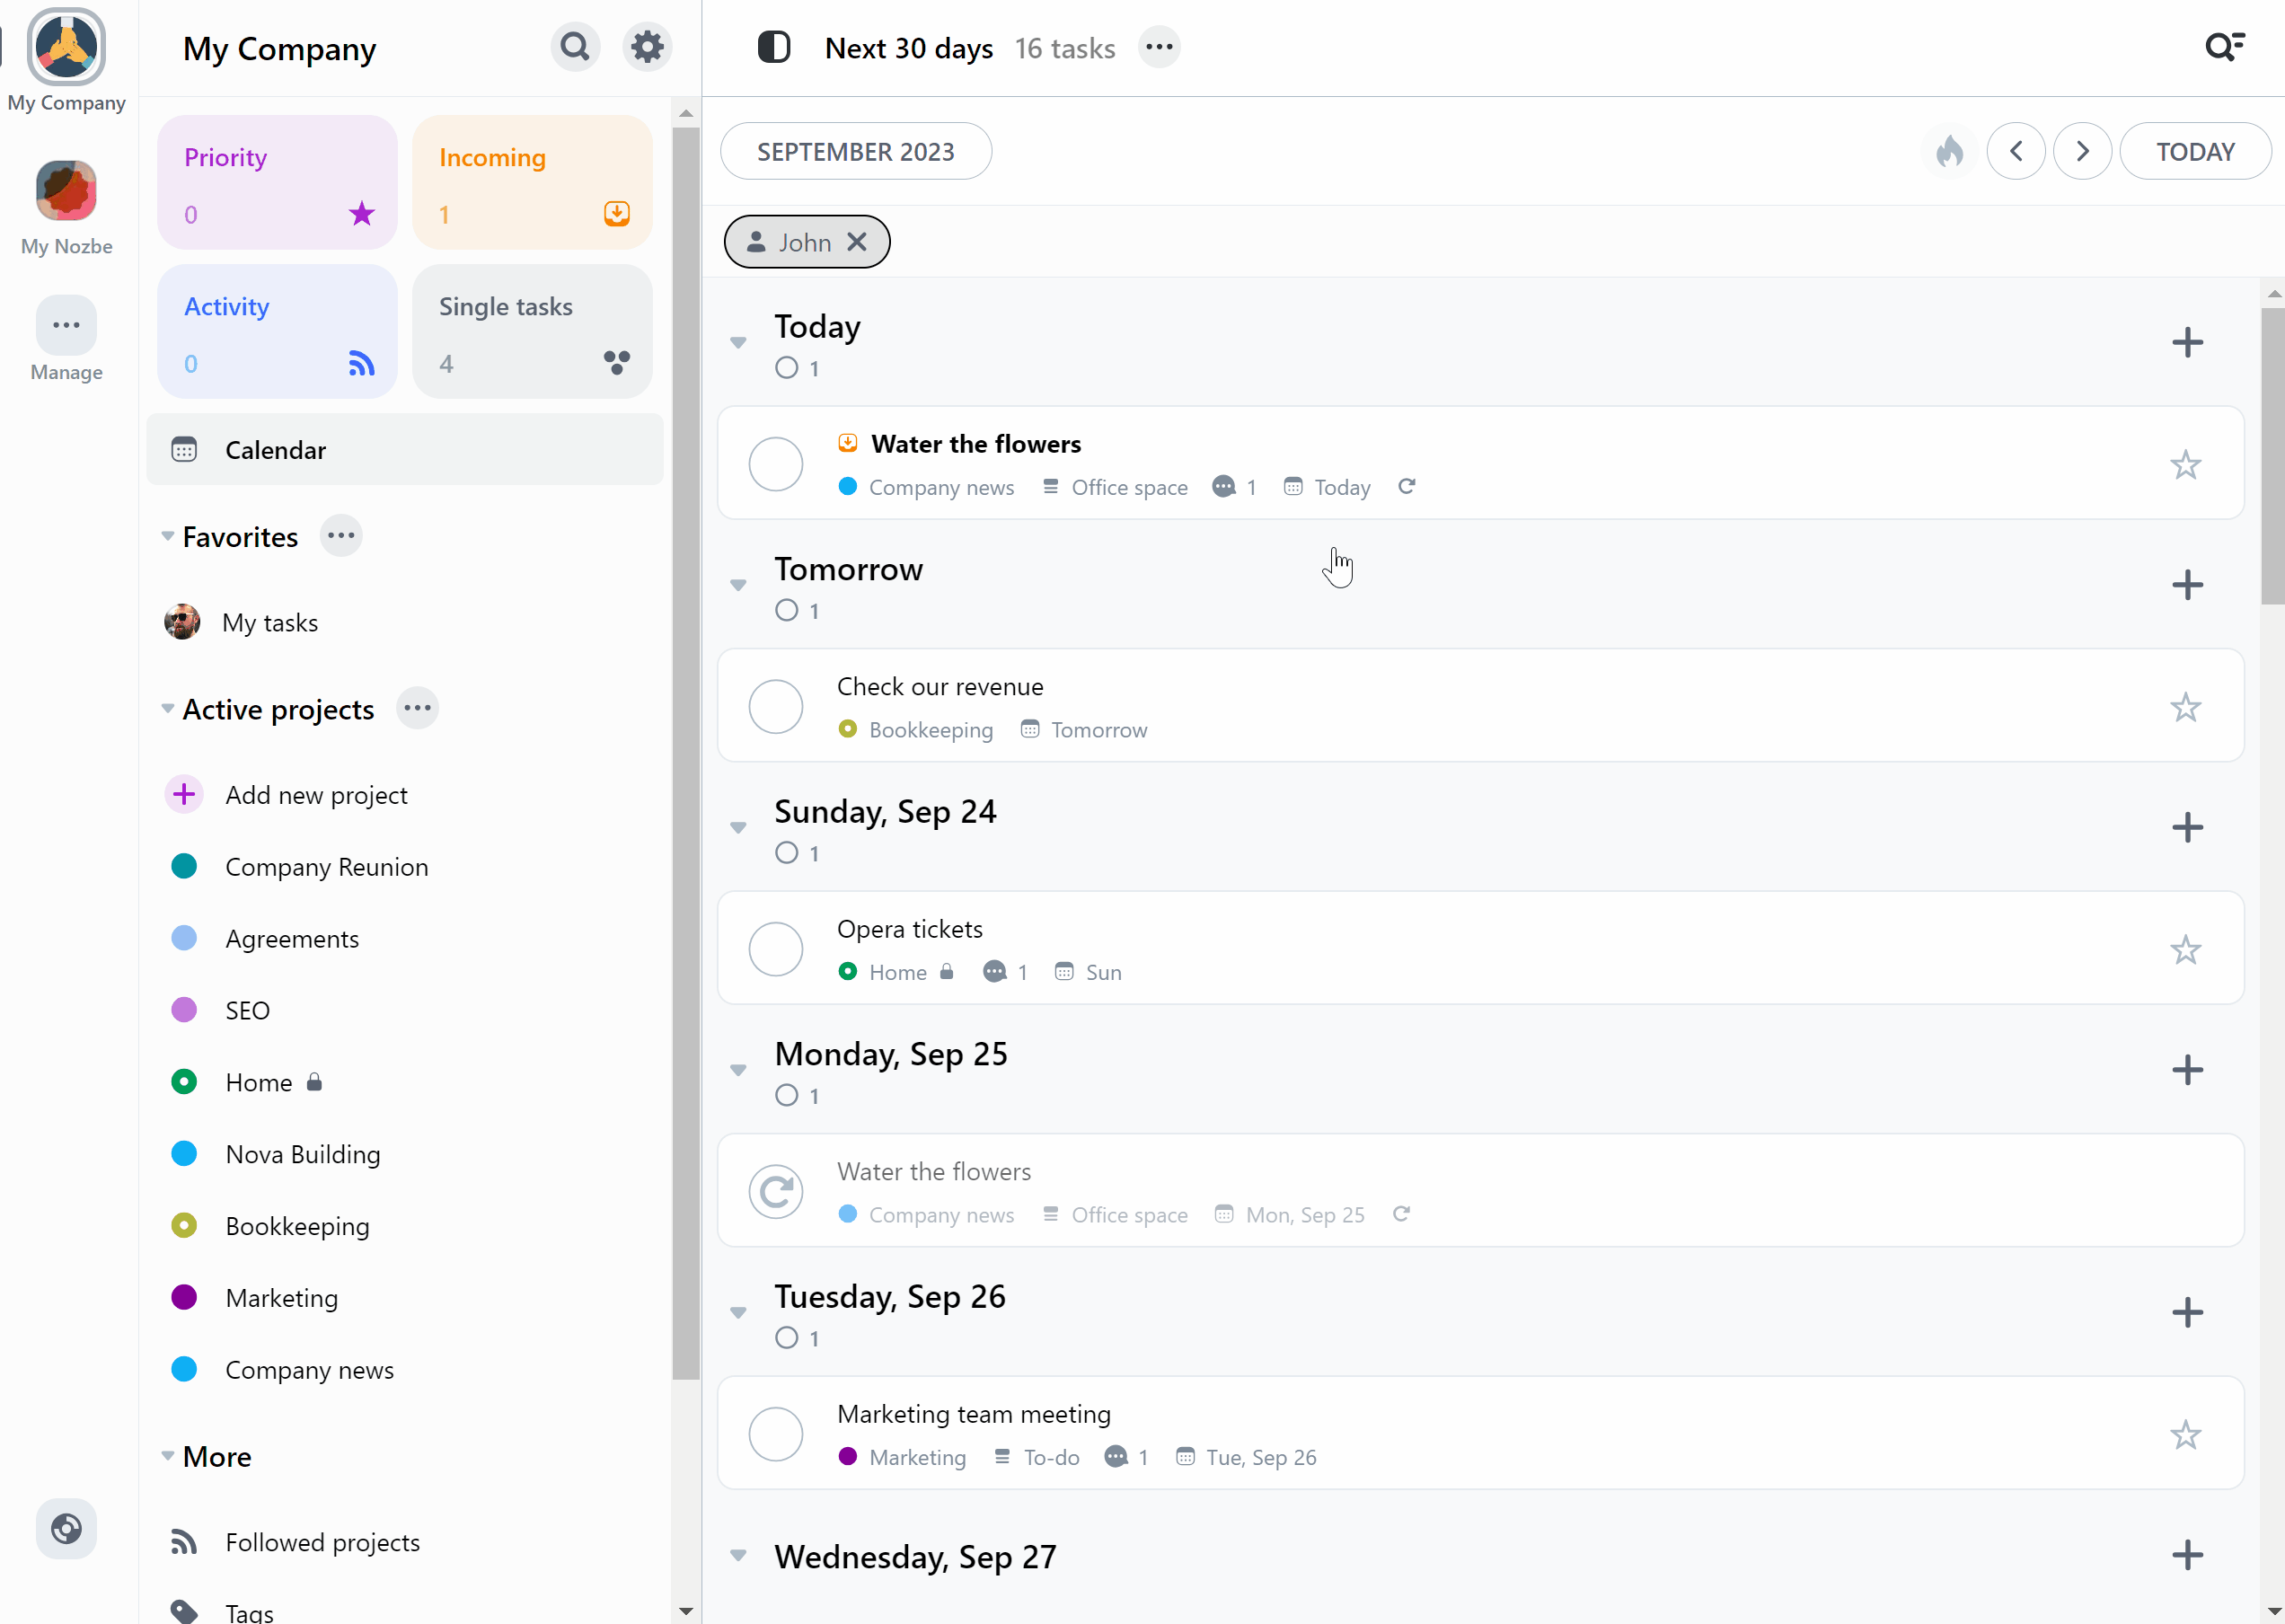 Using filters in the Calendar view